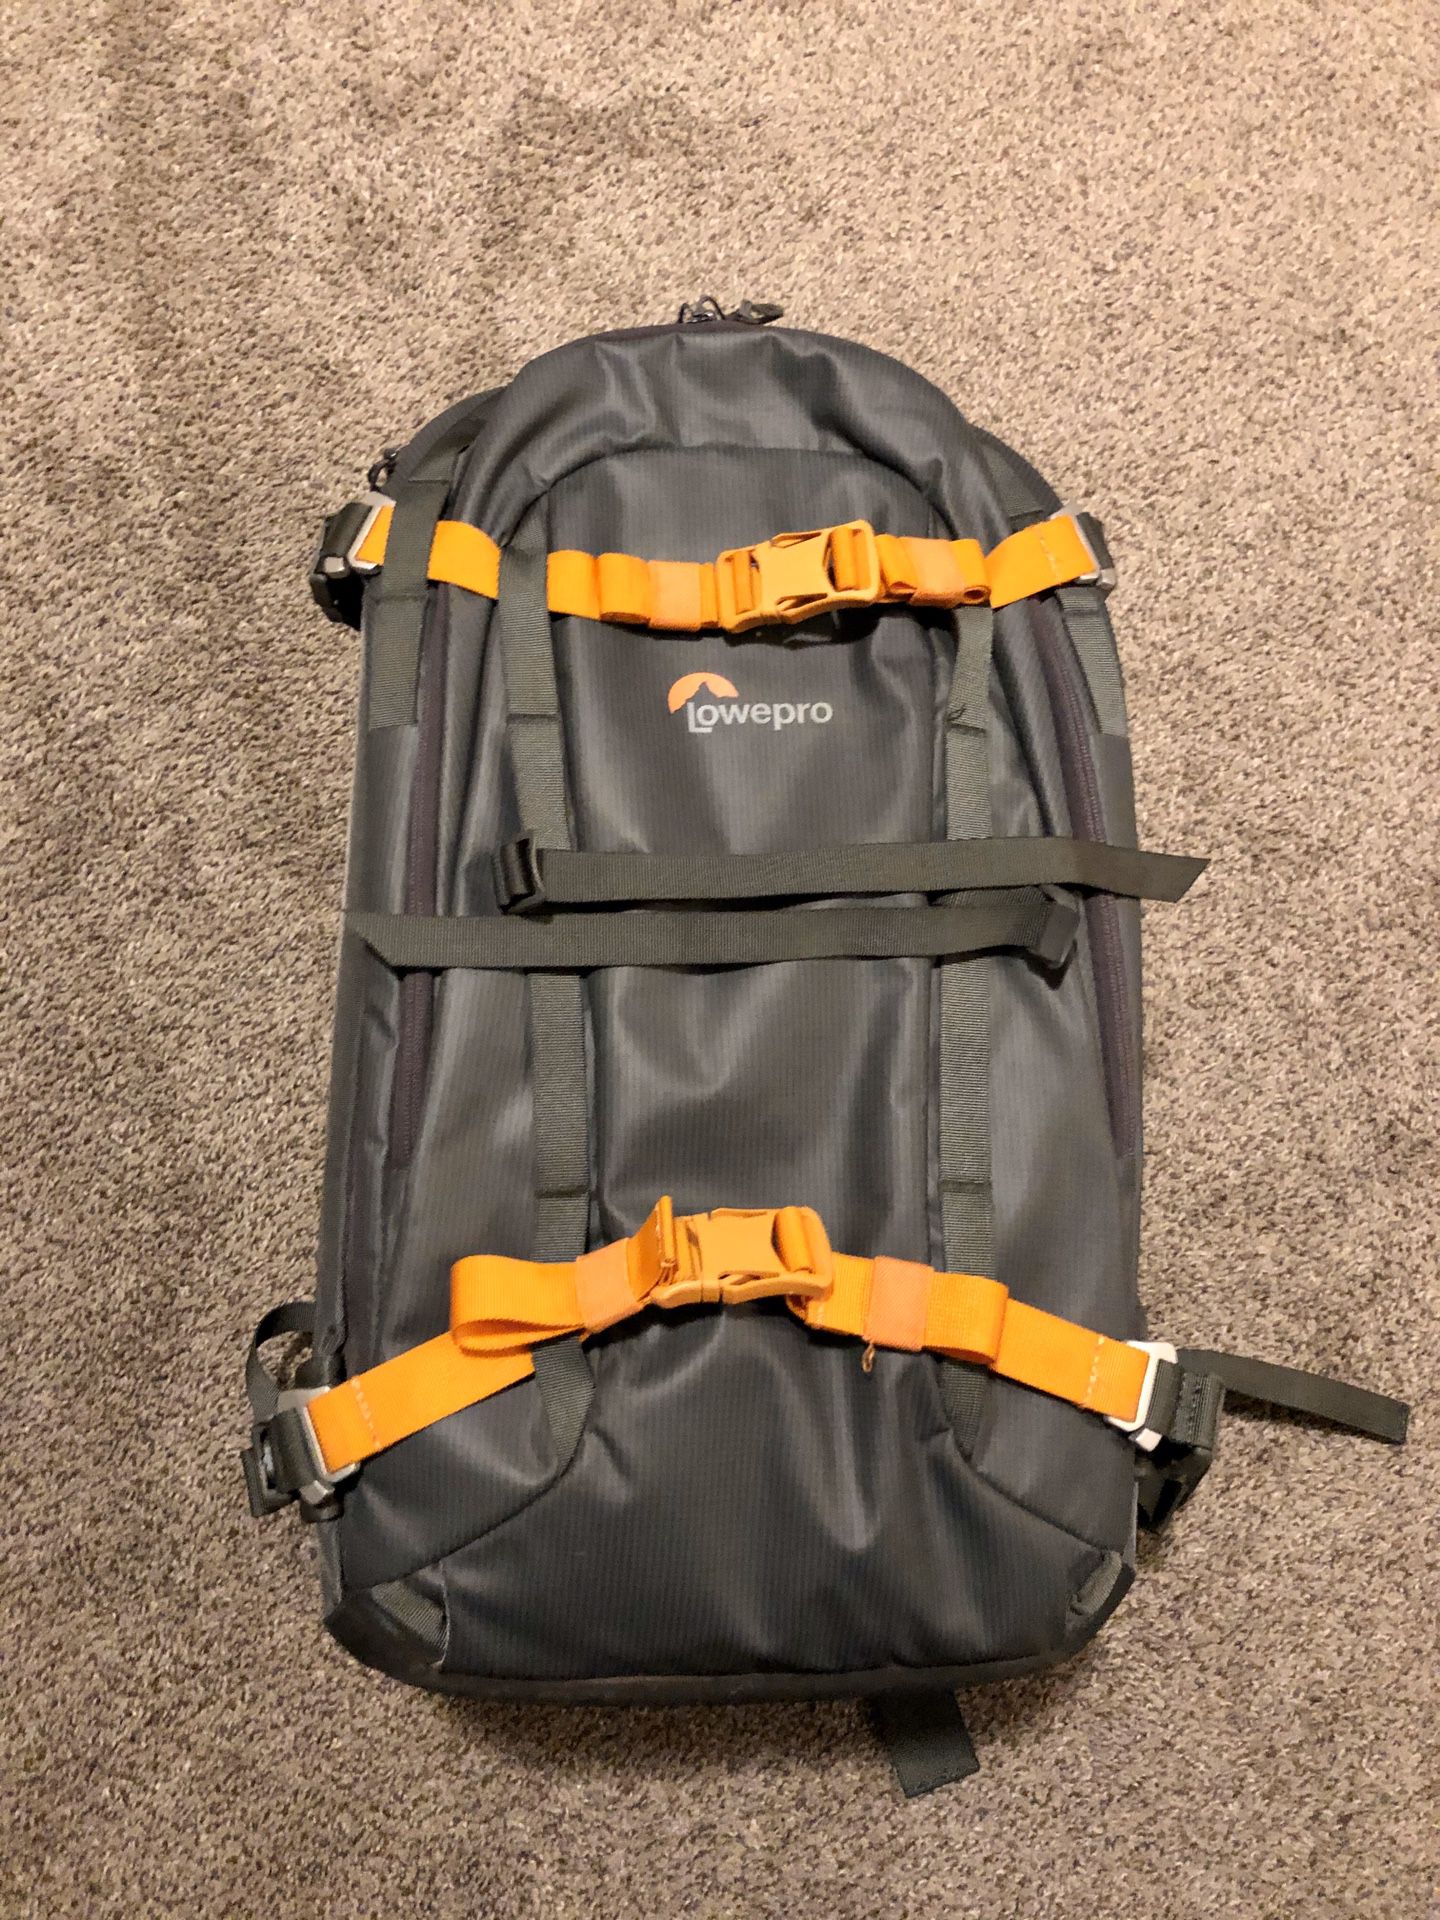 Lowepro Camera Backpack - Excellent Condition